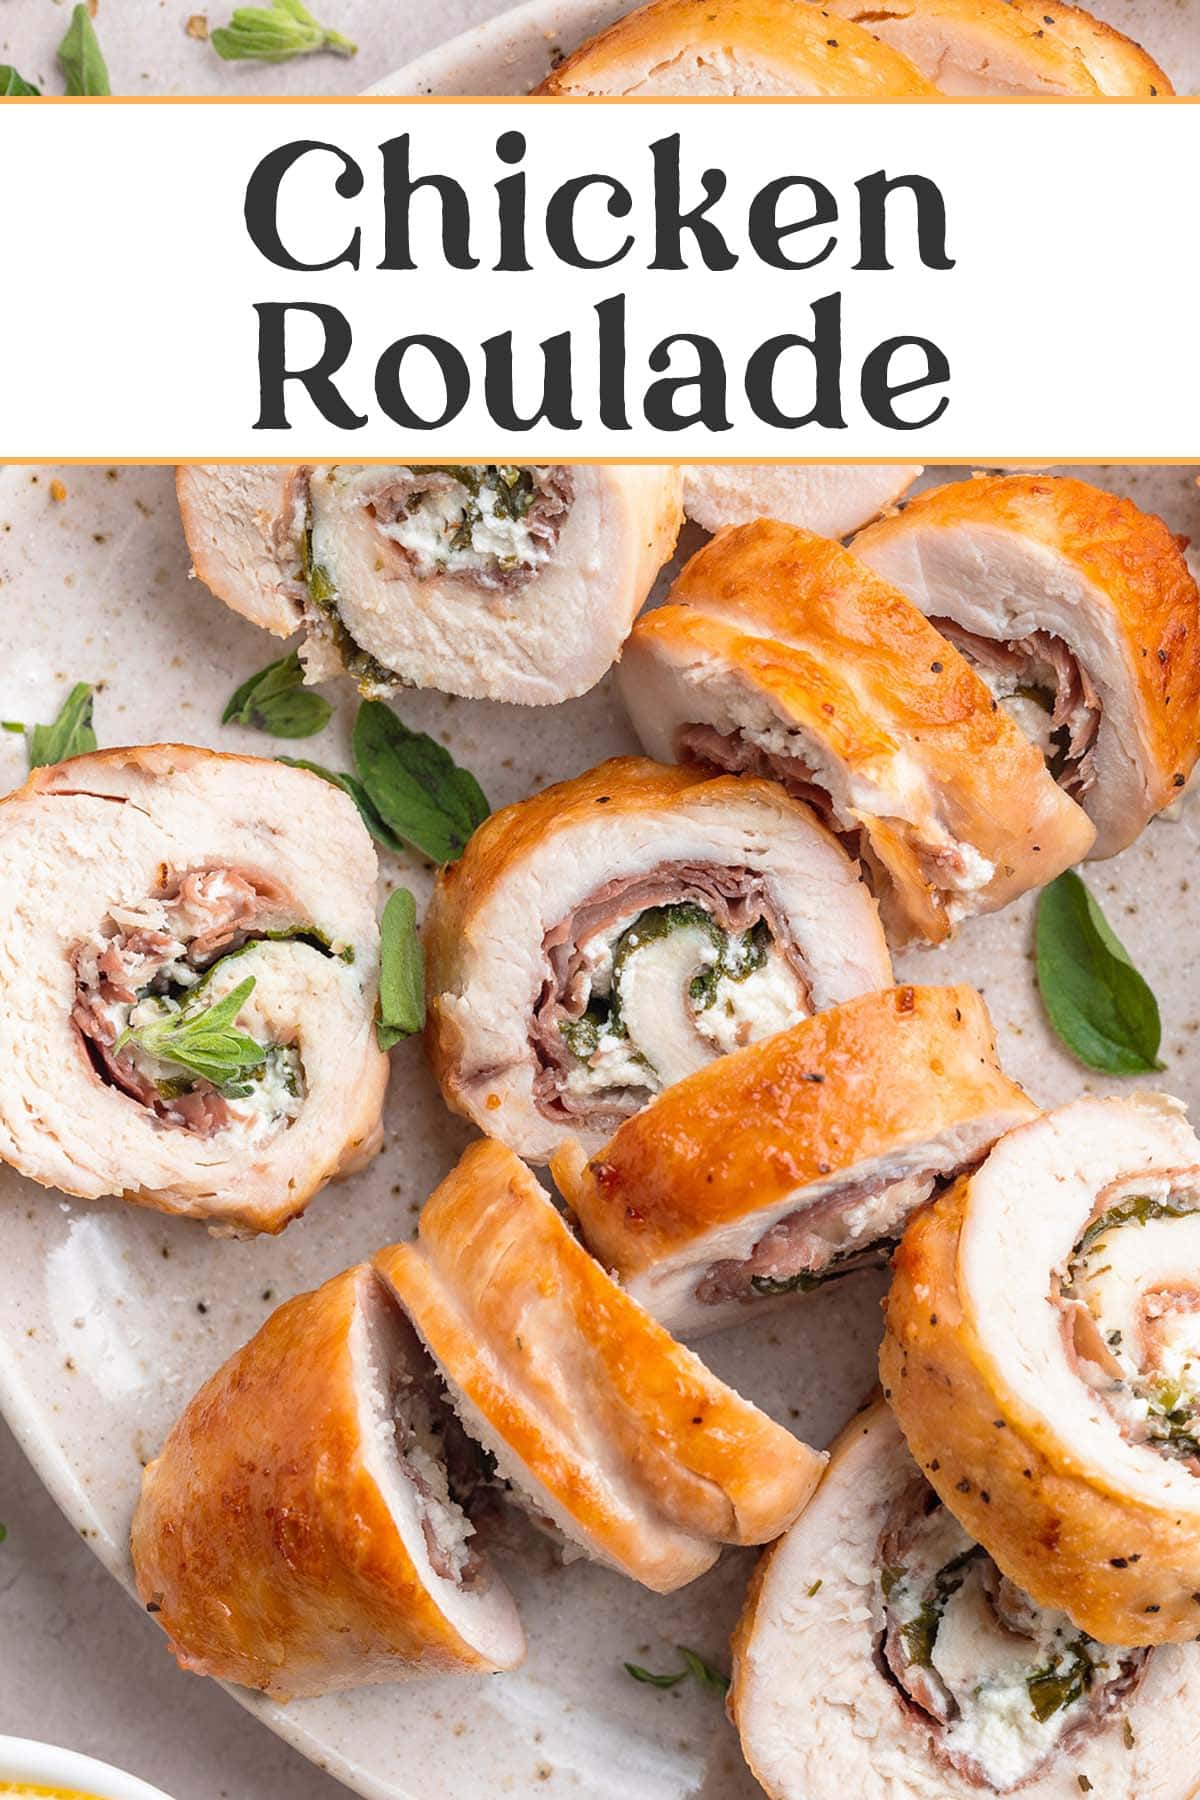 Pin graphic for chicken roulade.